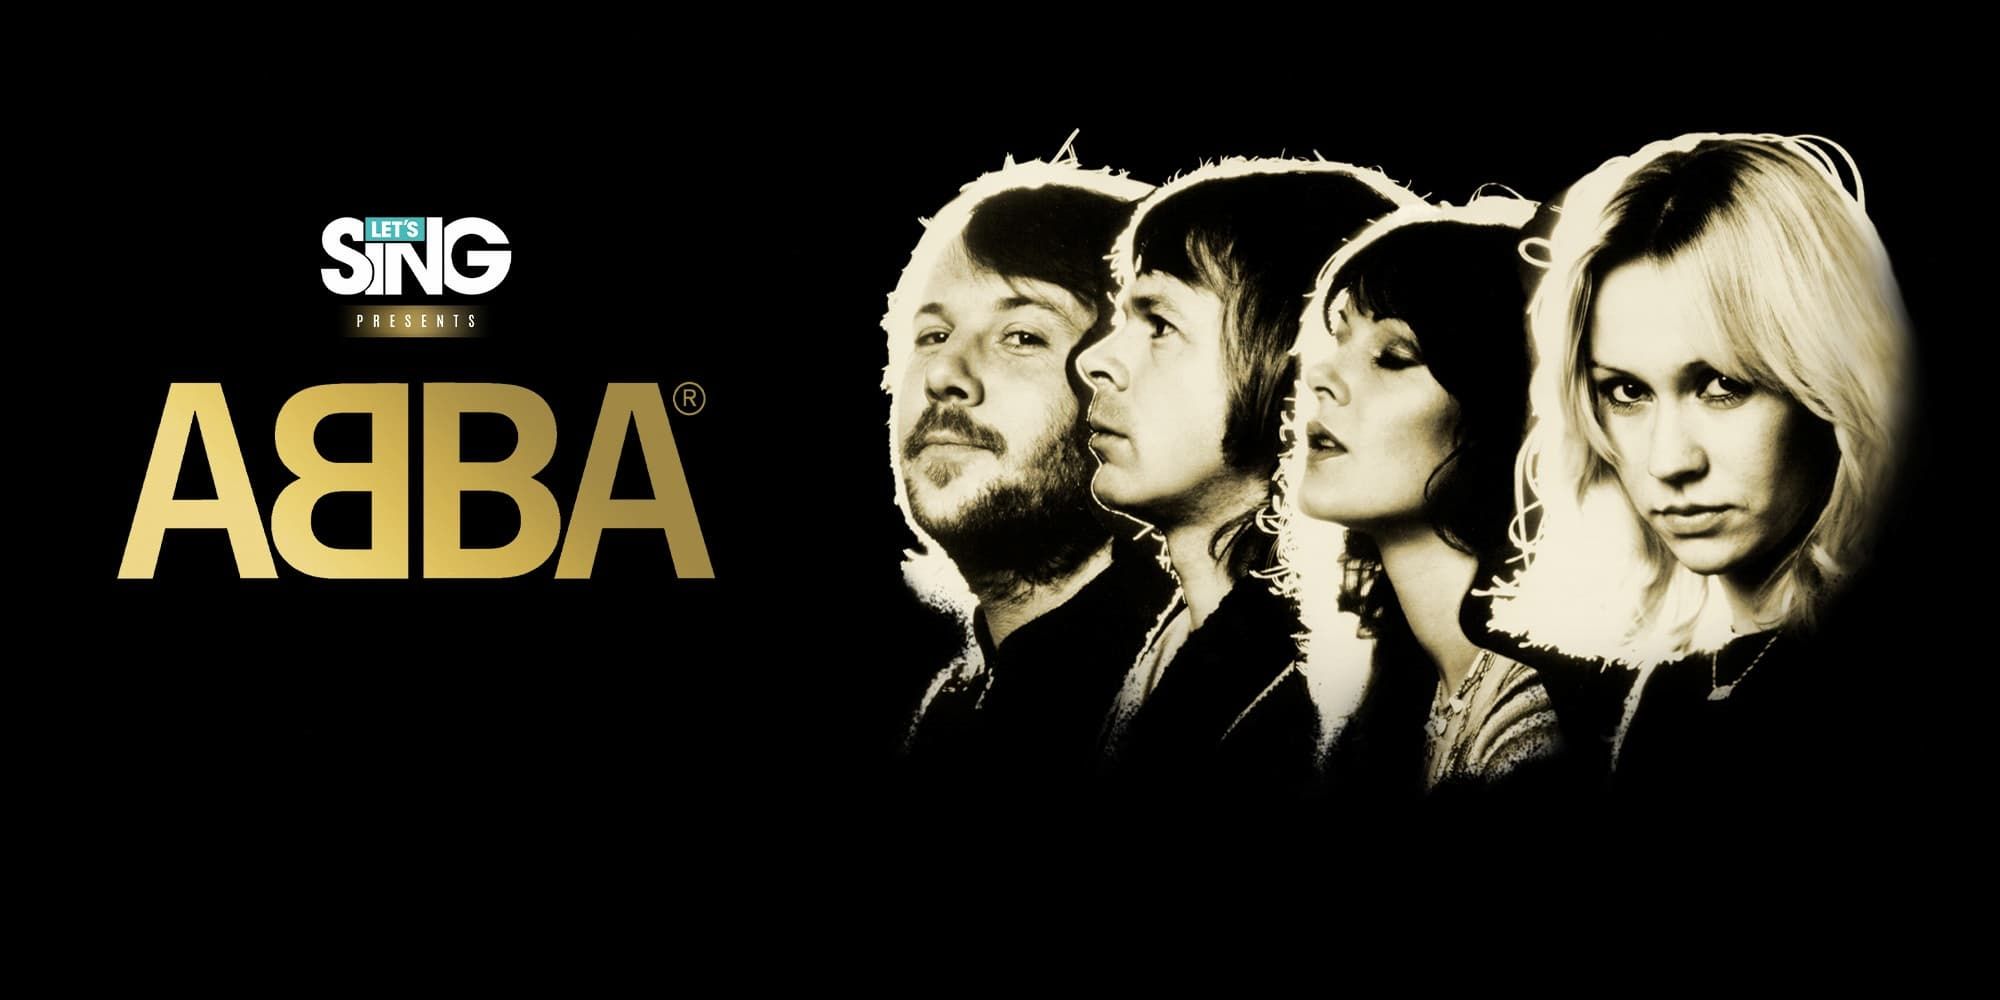 The four members of Abba pose for the Let's Sing Abba cover.